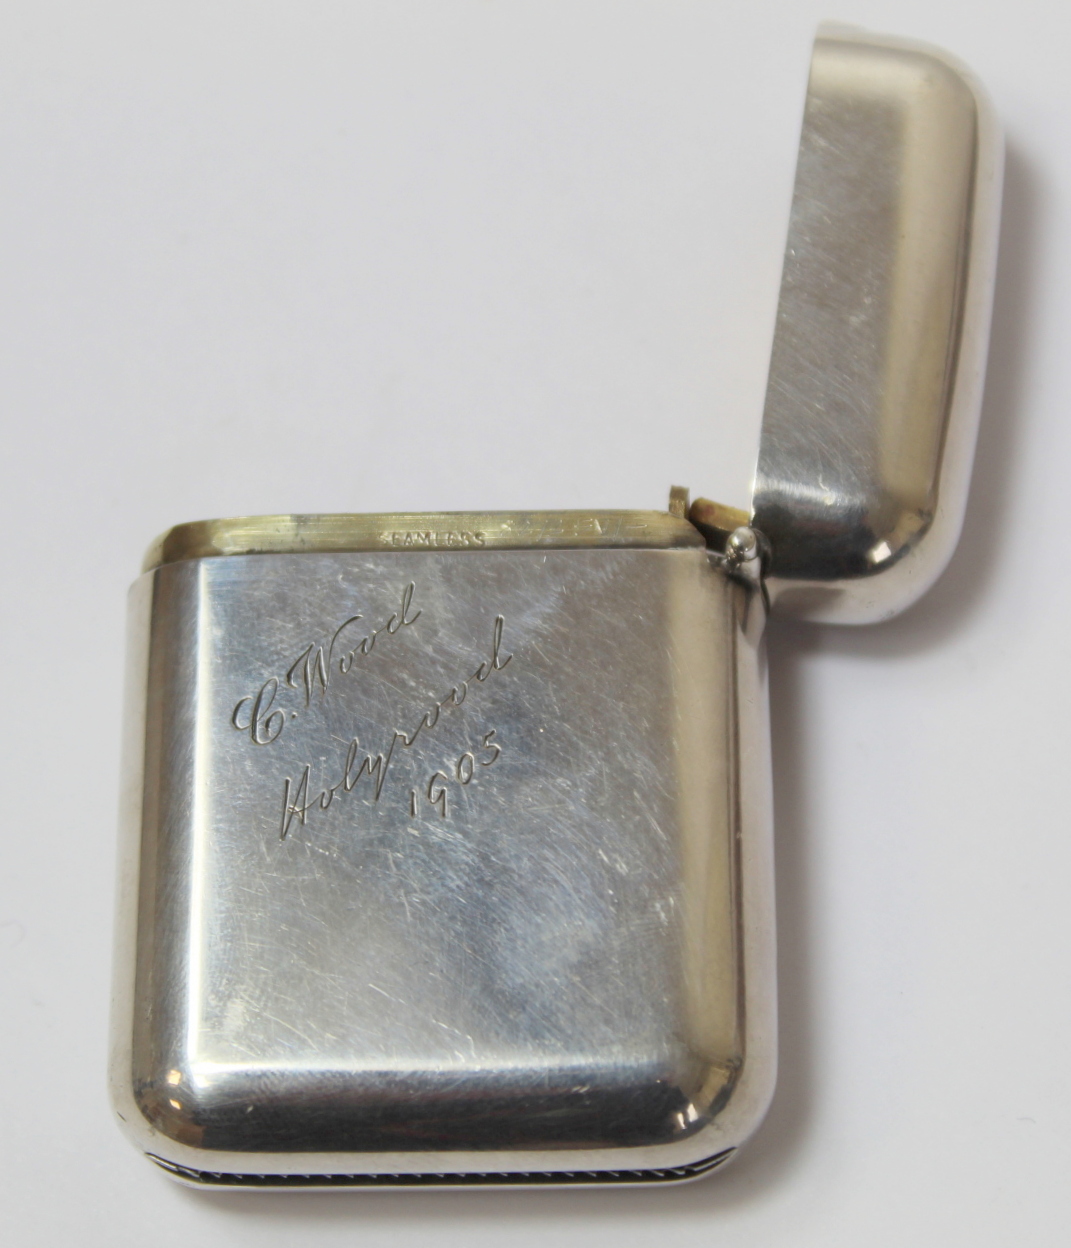 Mordan silver vesta case, crested with coronet, apparently the gift of Edward VII and Alexandra to - Image 4 of 5